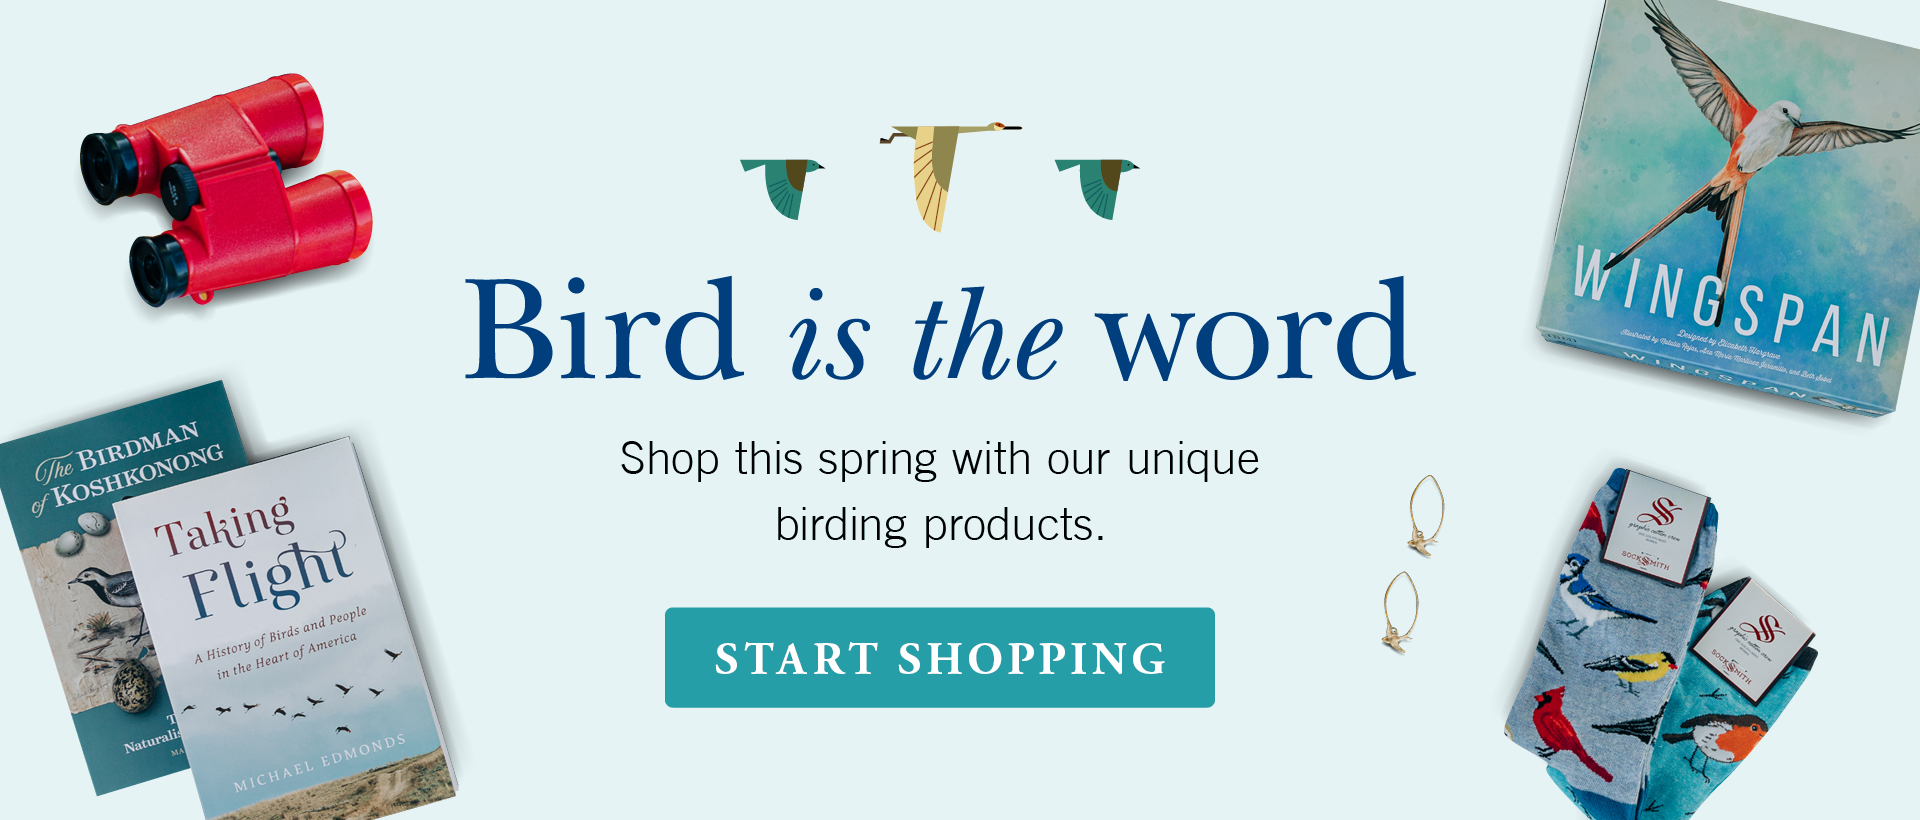 Bird is the Word! Shop this spring with our unique birding products. Start Shopping